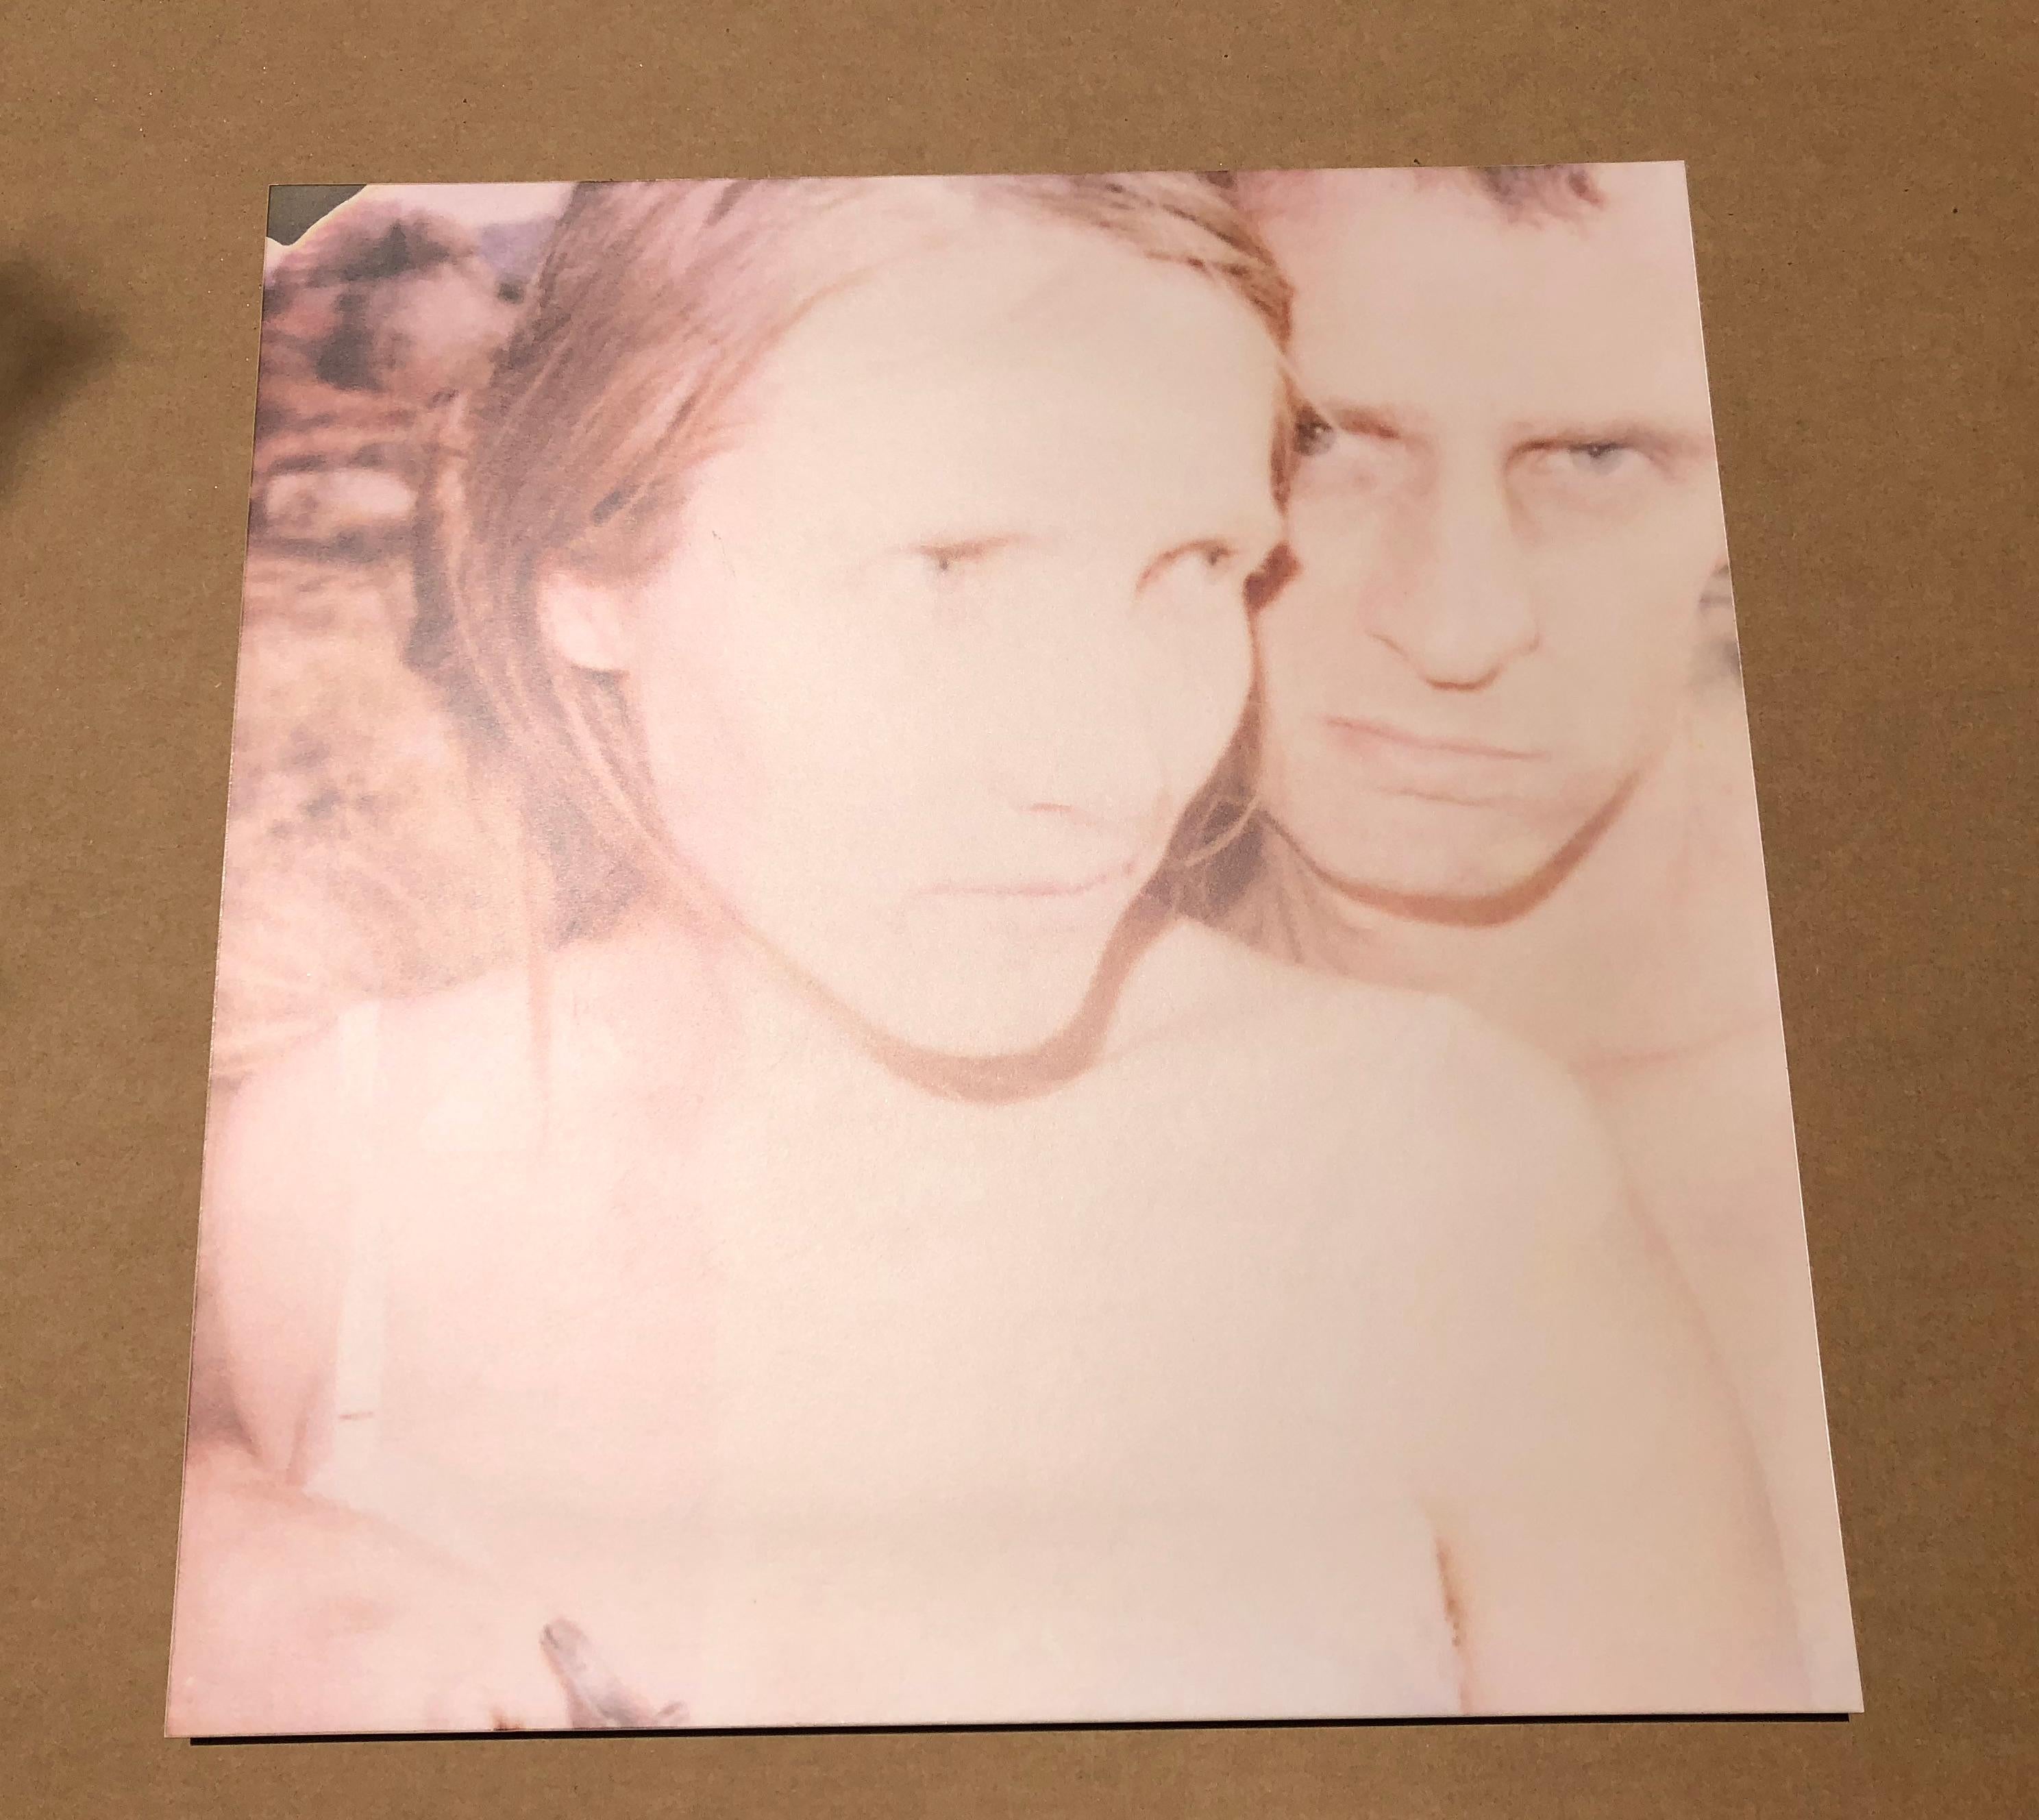 Randy and I - part 1 (Wastelands) - Polaroid, analog, mounted, Contemporary - Photograph by Stefanie Schneider